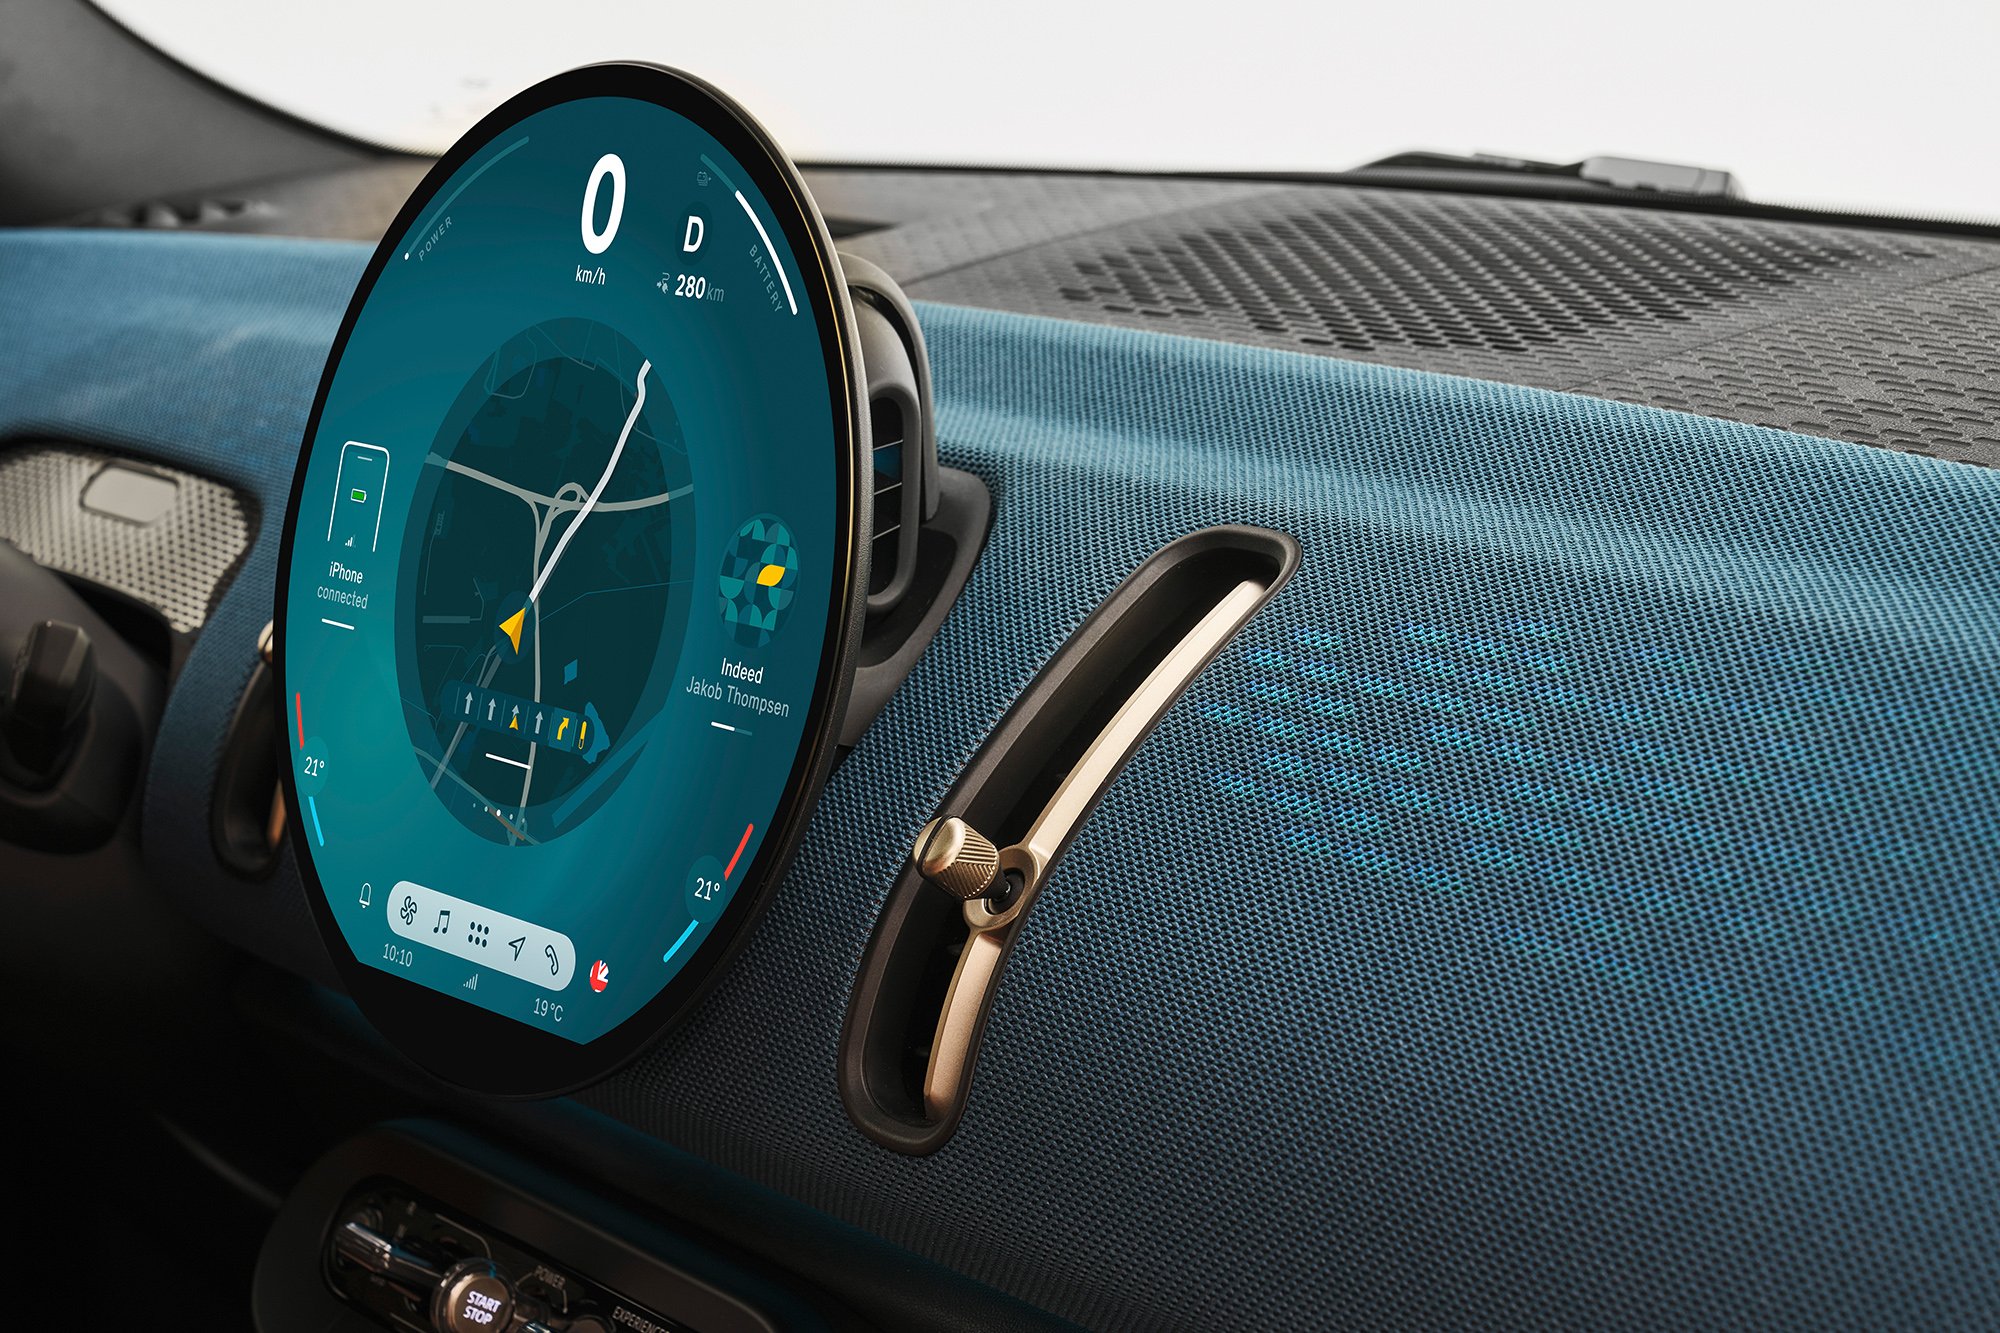 The dashboard design of the new all-electric MINI Countryman